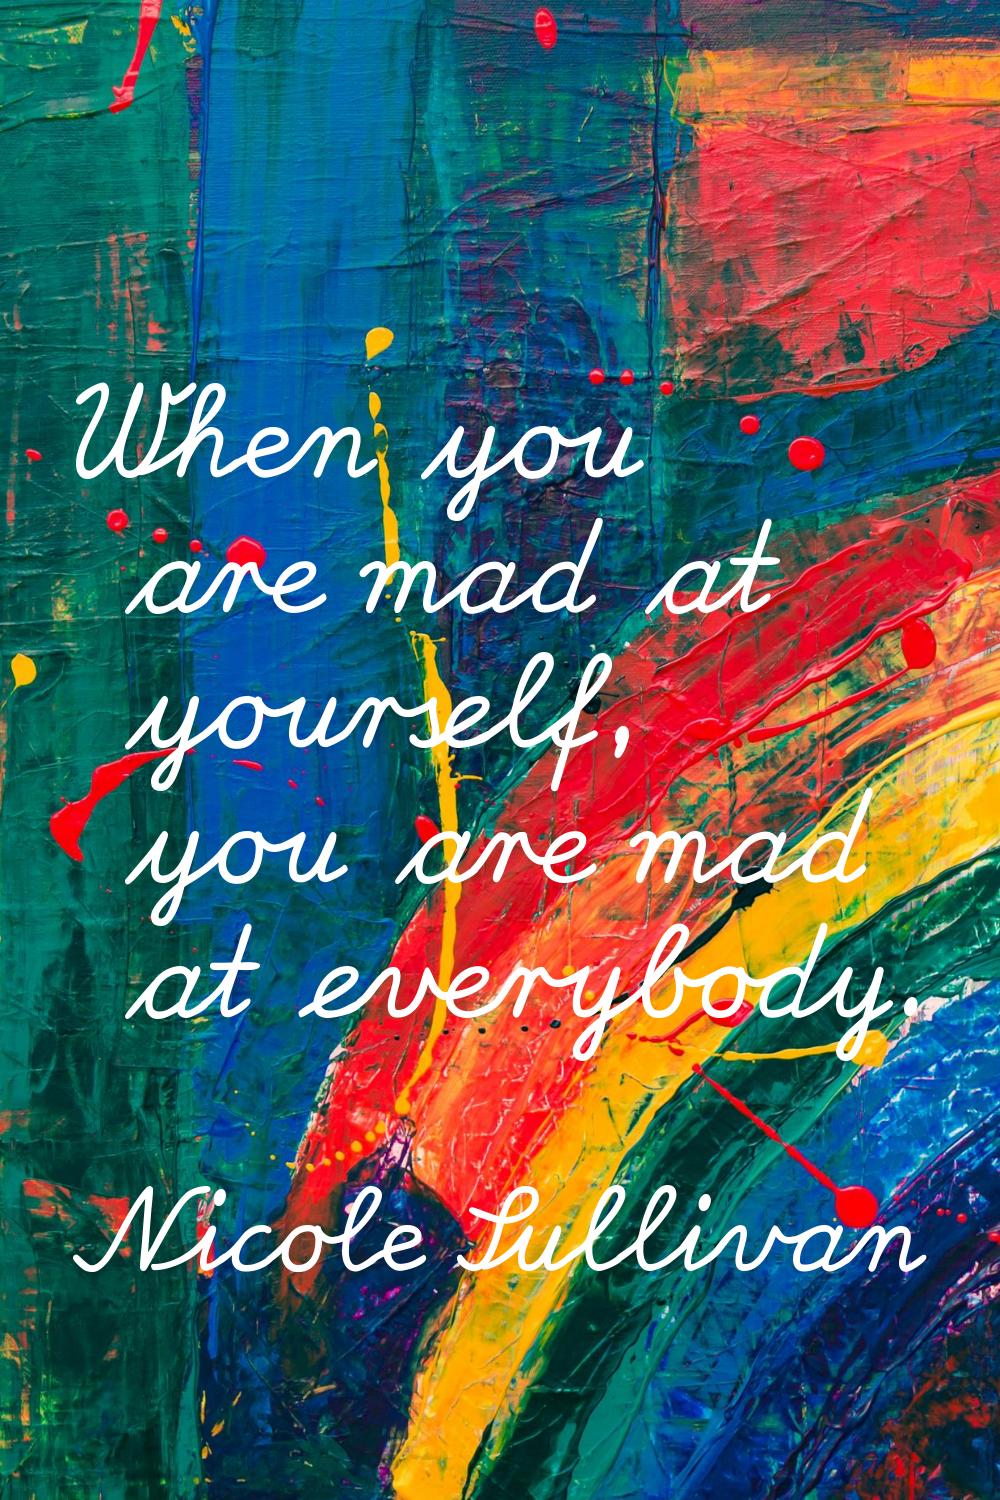 When you are mad at yourself, you are mad at everybody.